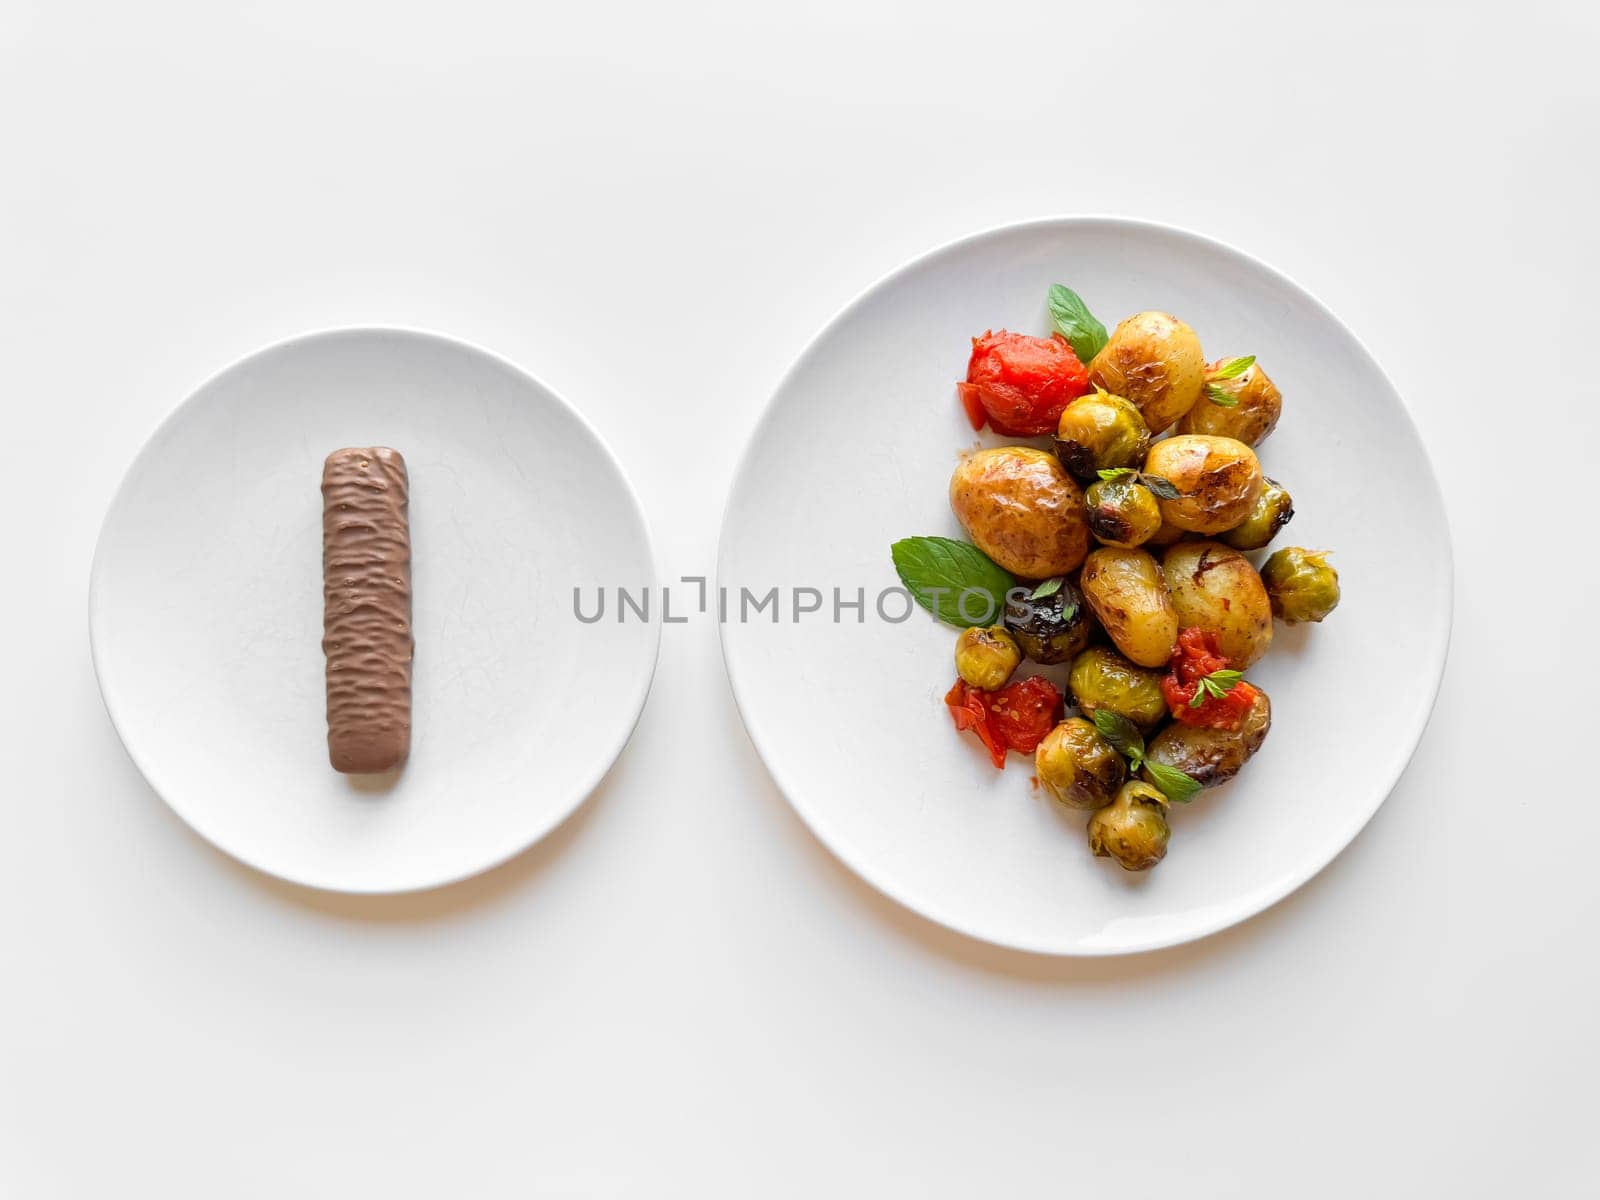 Two white plates on table, one with single chocolate bar and other with roasted baby potatoes and Brussels sprouts, contrasting healthy and indulgent food choices. by Lunnica